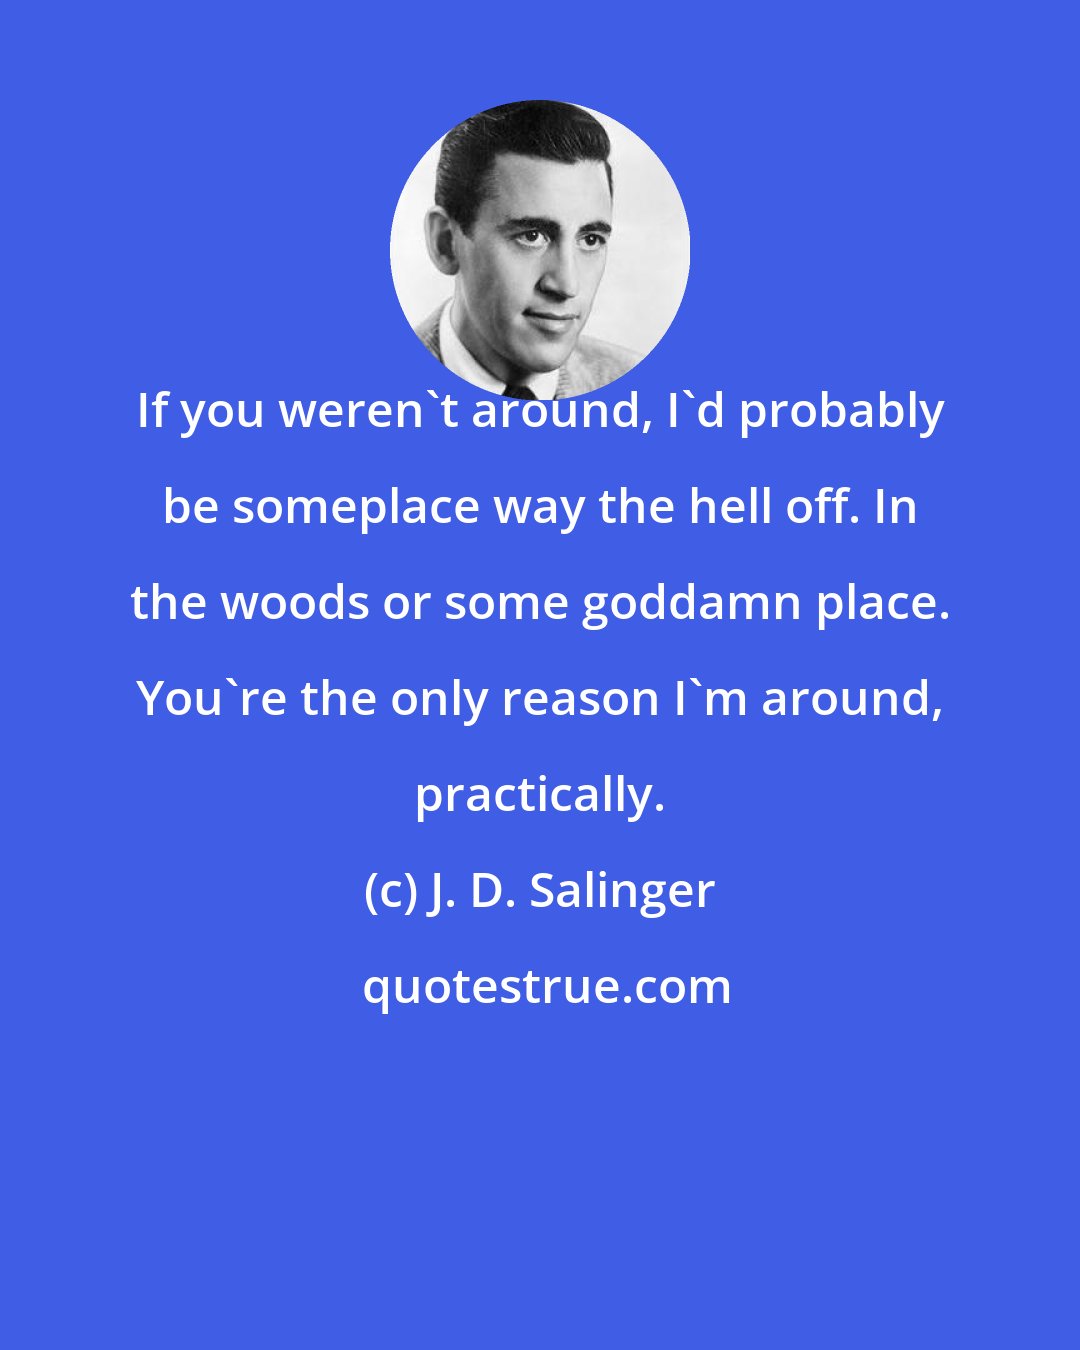 J. D. Salinger: If you weren't around, I'd probably be someplace way the hell off. In the woods or some goddamn place. You're the only reason I'm around, practically.